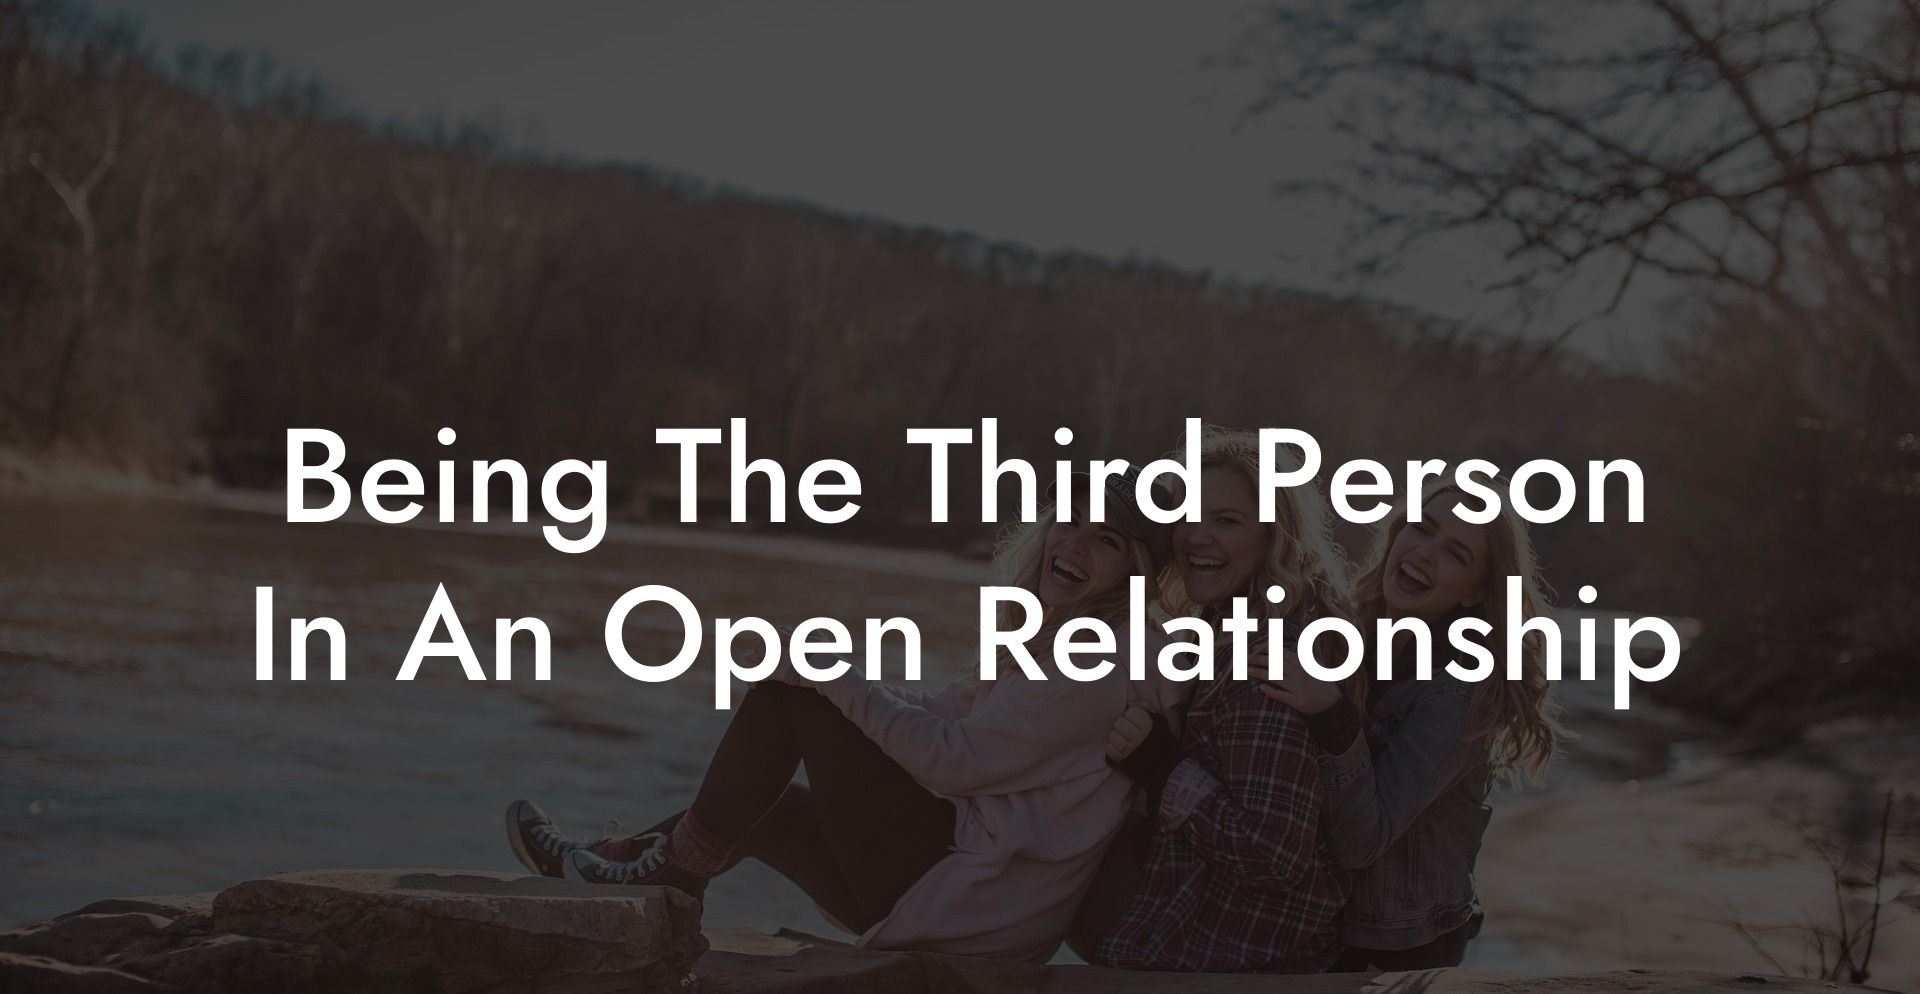 Being The Third Person In An Open Relationship